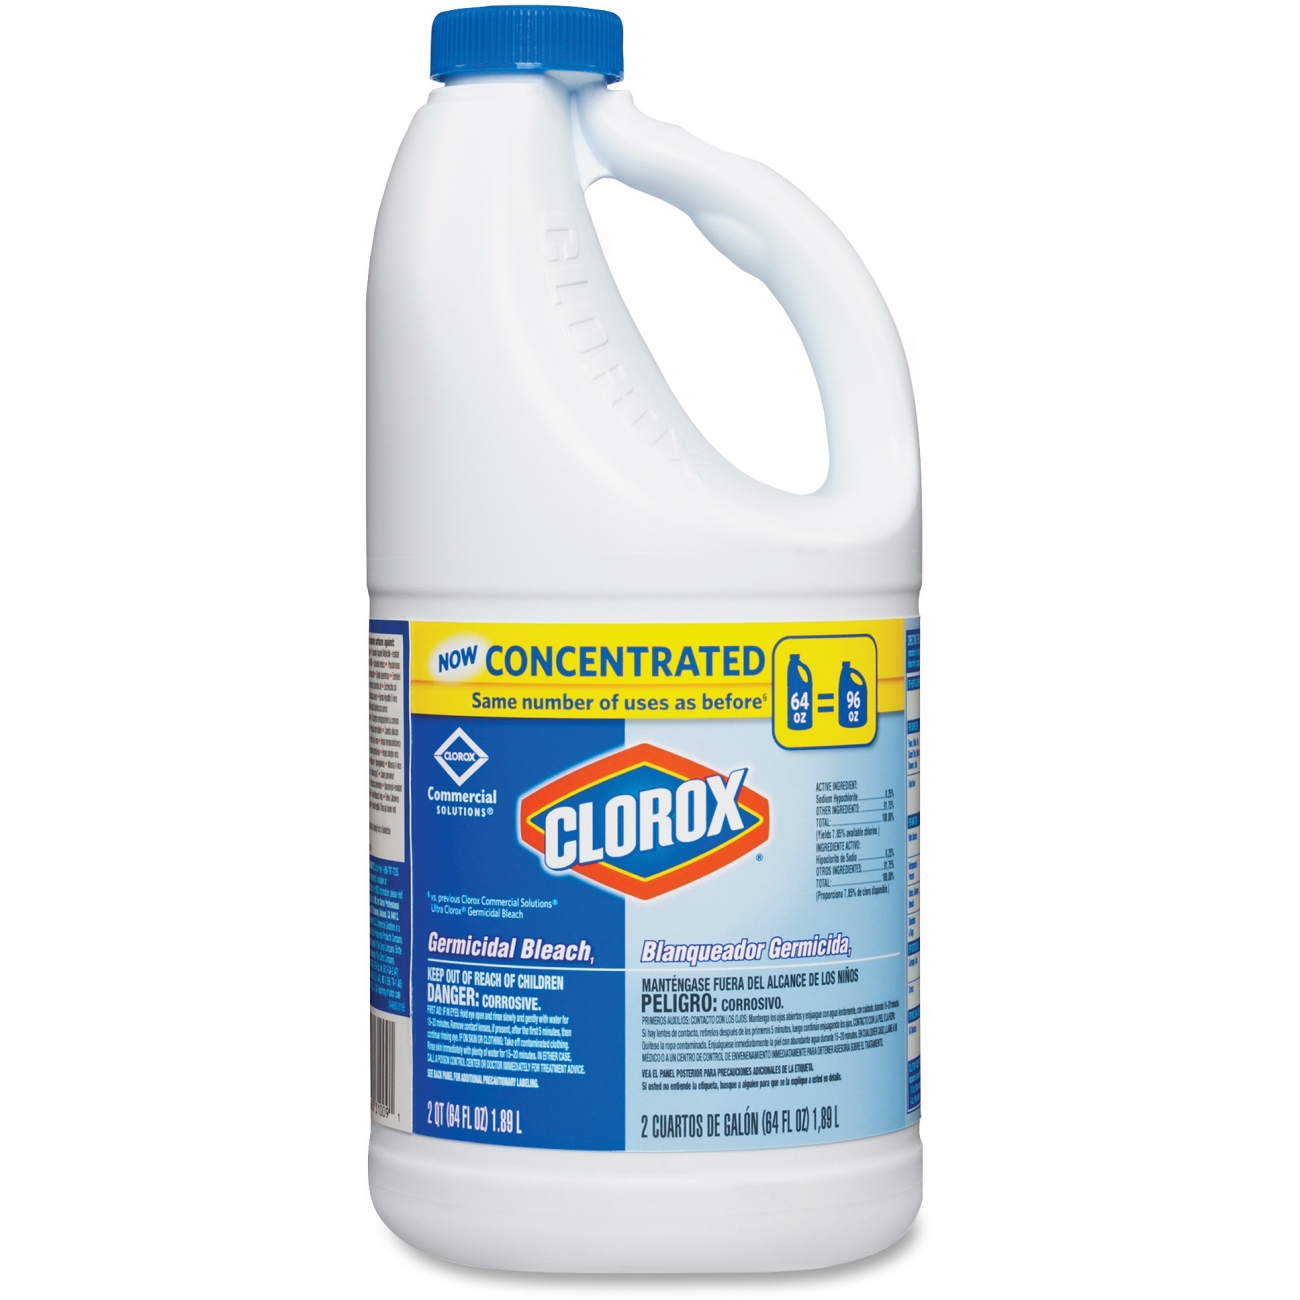 Clorox Cleaning and Janitorial Supplies